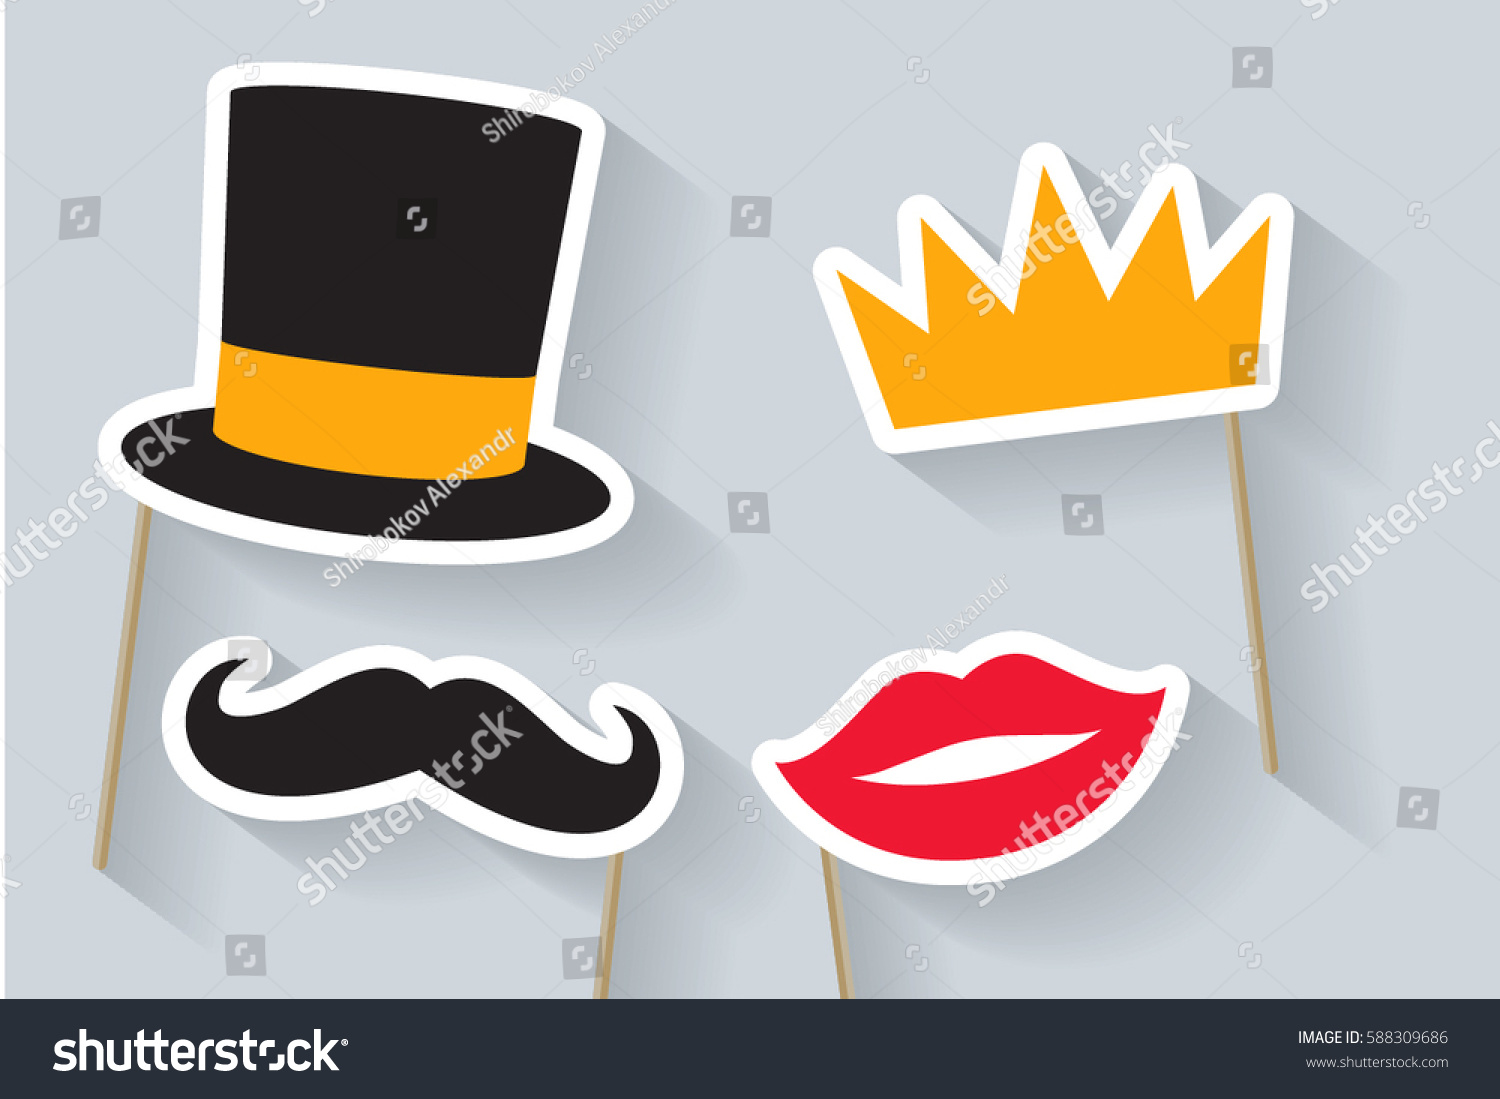 Party set. Concept with cardboard carnival mask. Includes crown, hat, lips and mustache. Masks for a photo shoot. #588309686